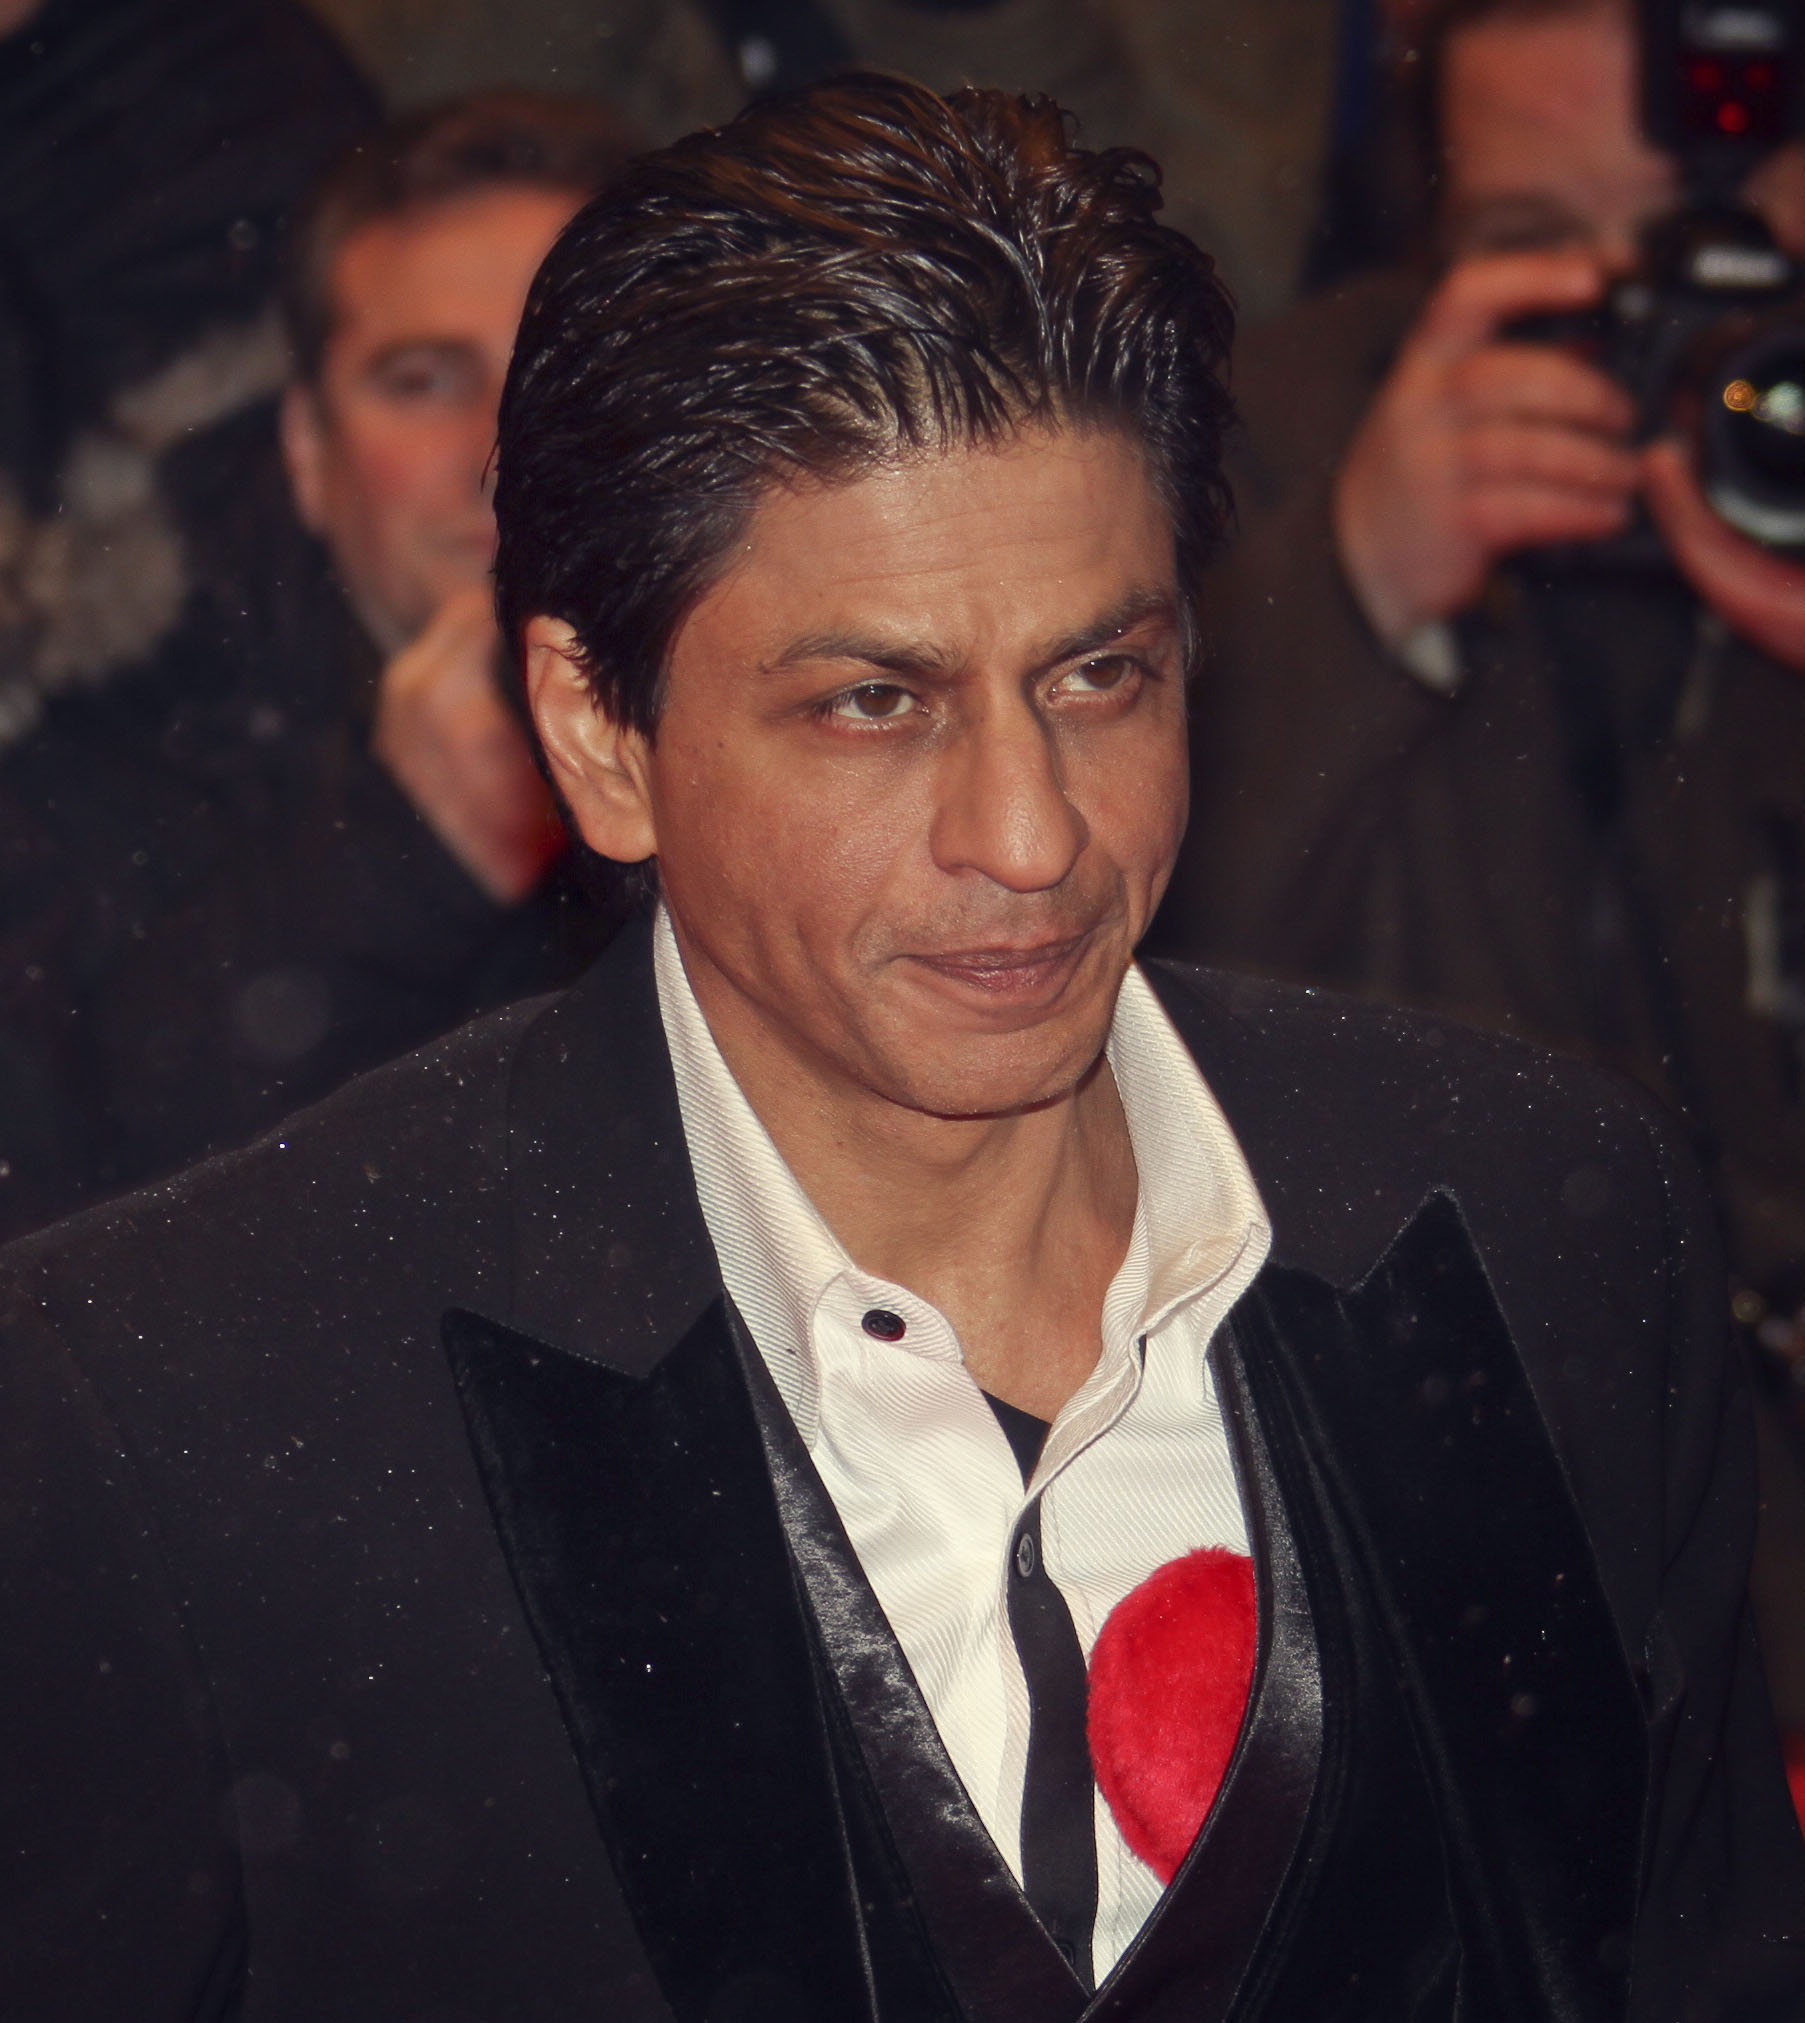 Indian actor Shah Rukh Khan became part-owner of the cricket team Kolkata Knight Riders, which was one of the richest teams in the Indian Premier League, with a brand value of $84million